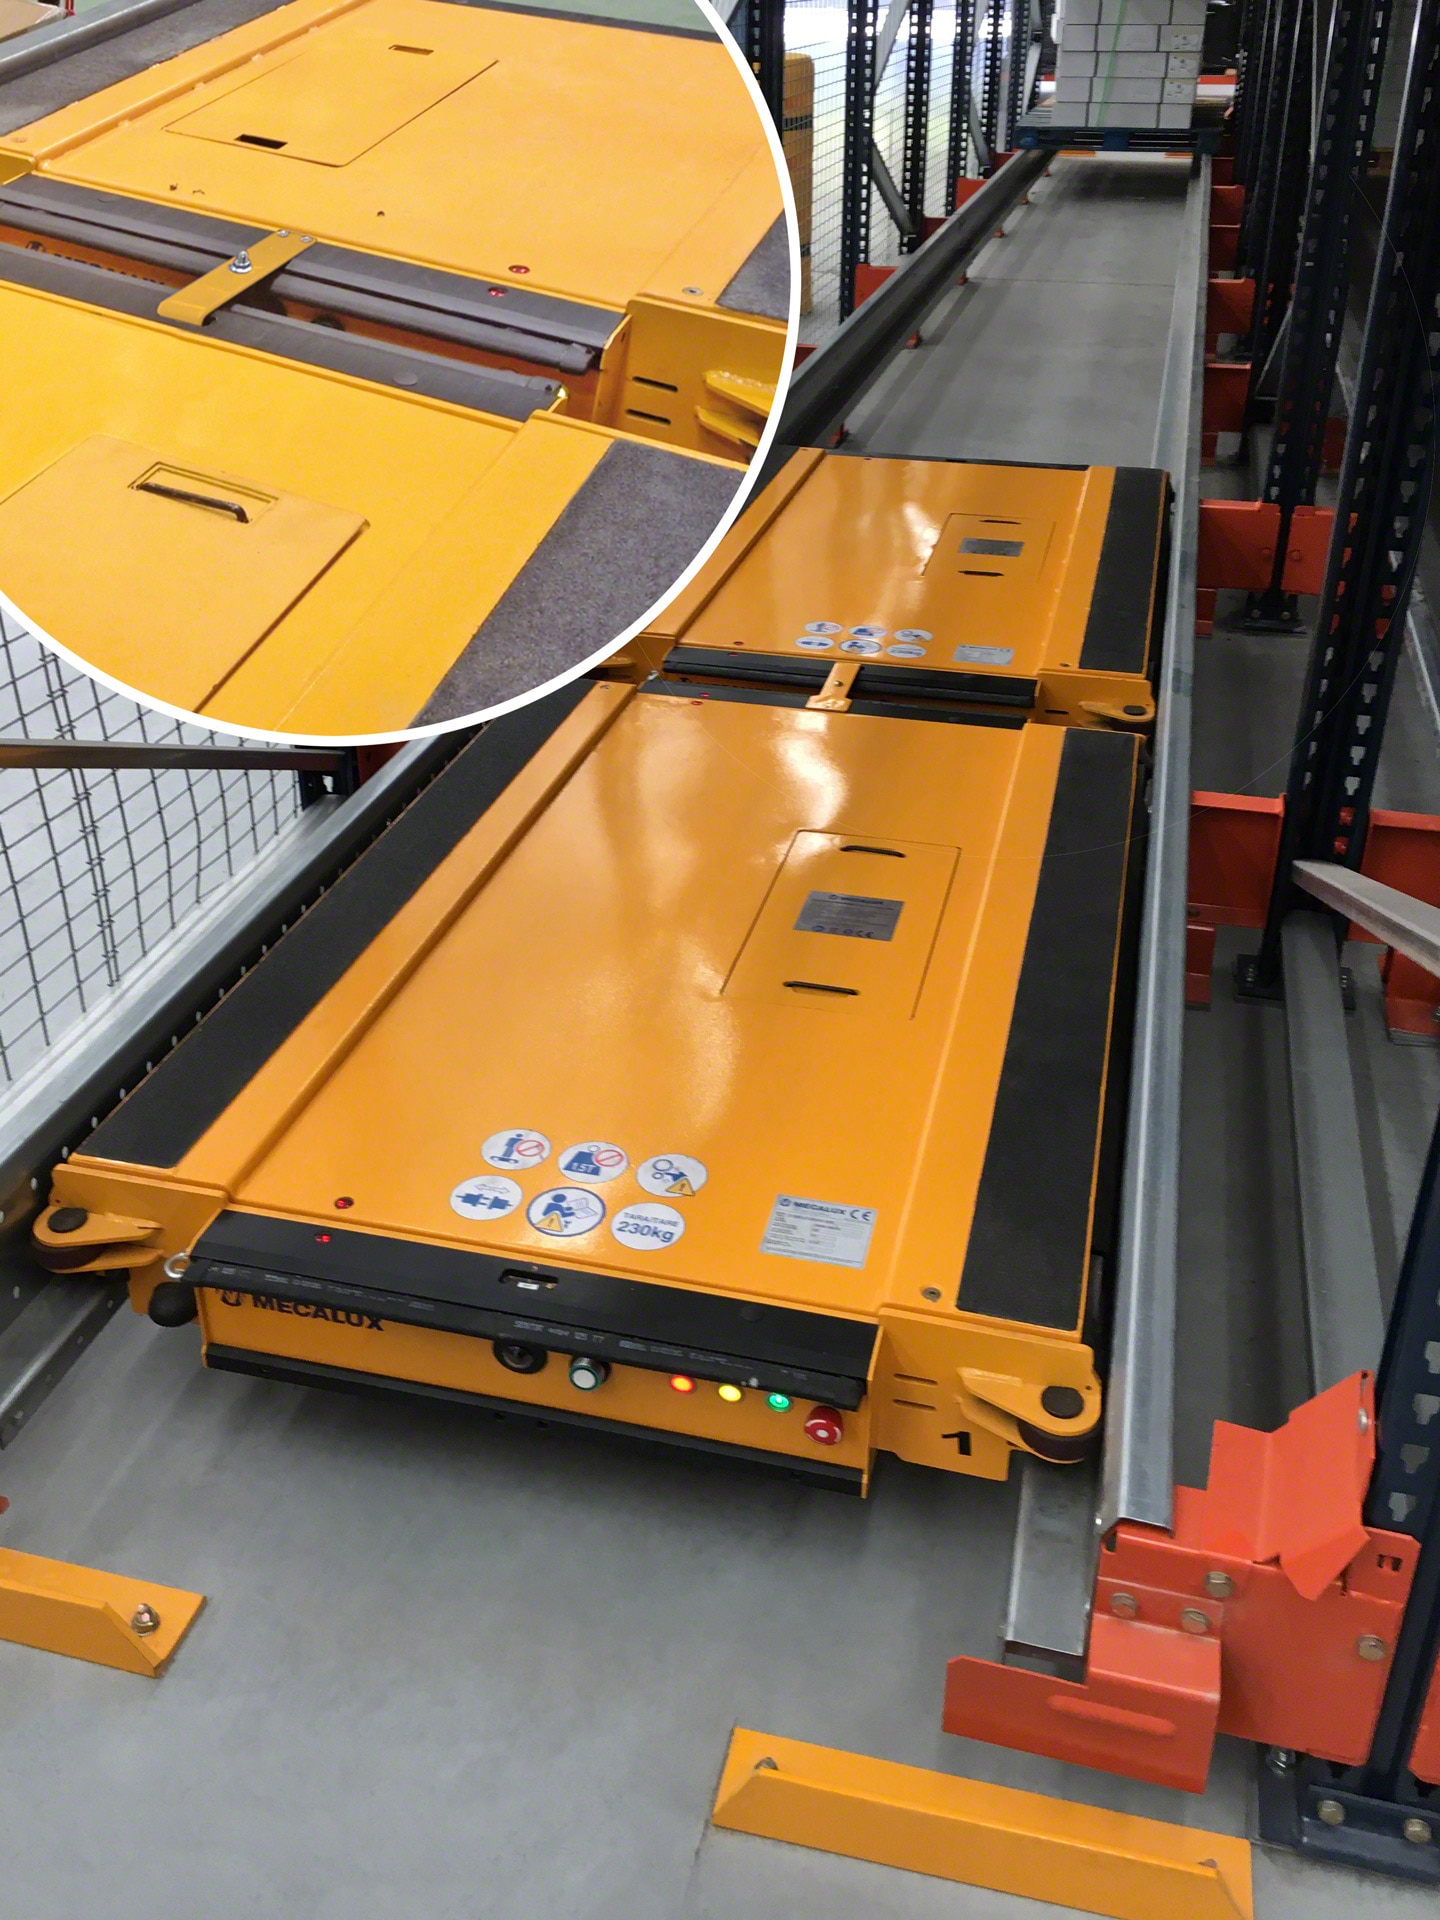 Semi-automatic shuttles include a rescue function, which allows the Pallet Shuttle to be recovered if it breakdowns